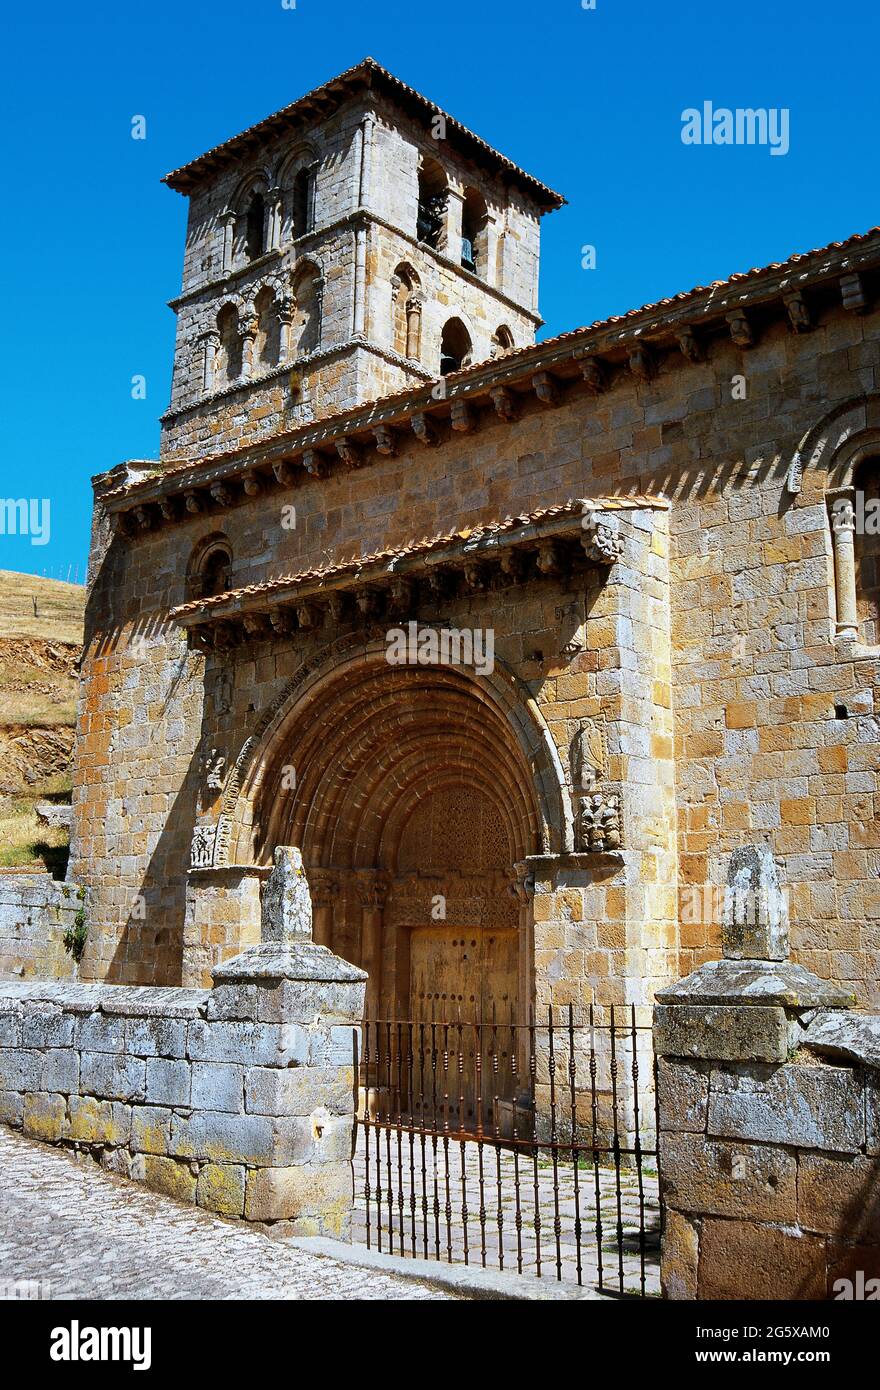 Spain, Cantabria, Cervatos. Collegiate Church of San Pedro de Cervatos.  Built in 1129 on the site of an old monastery, in Cantabrian Romanesque  style. The tower was built in 1199 Stock Photo - Alamy